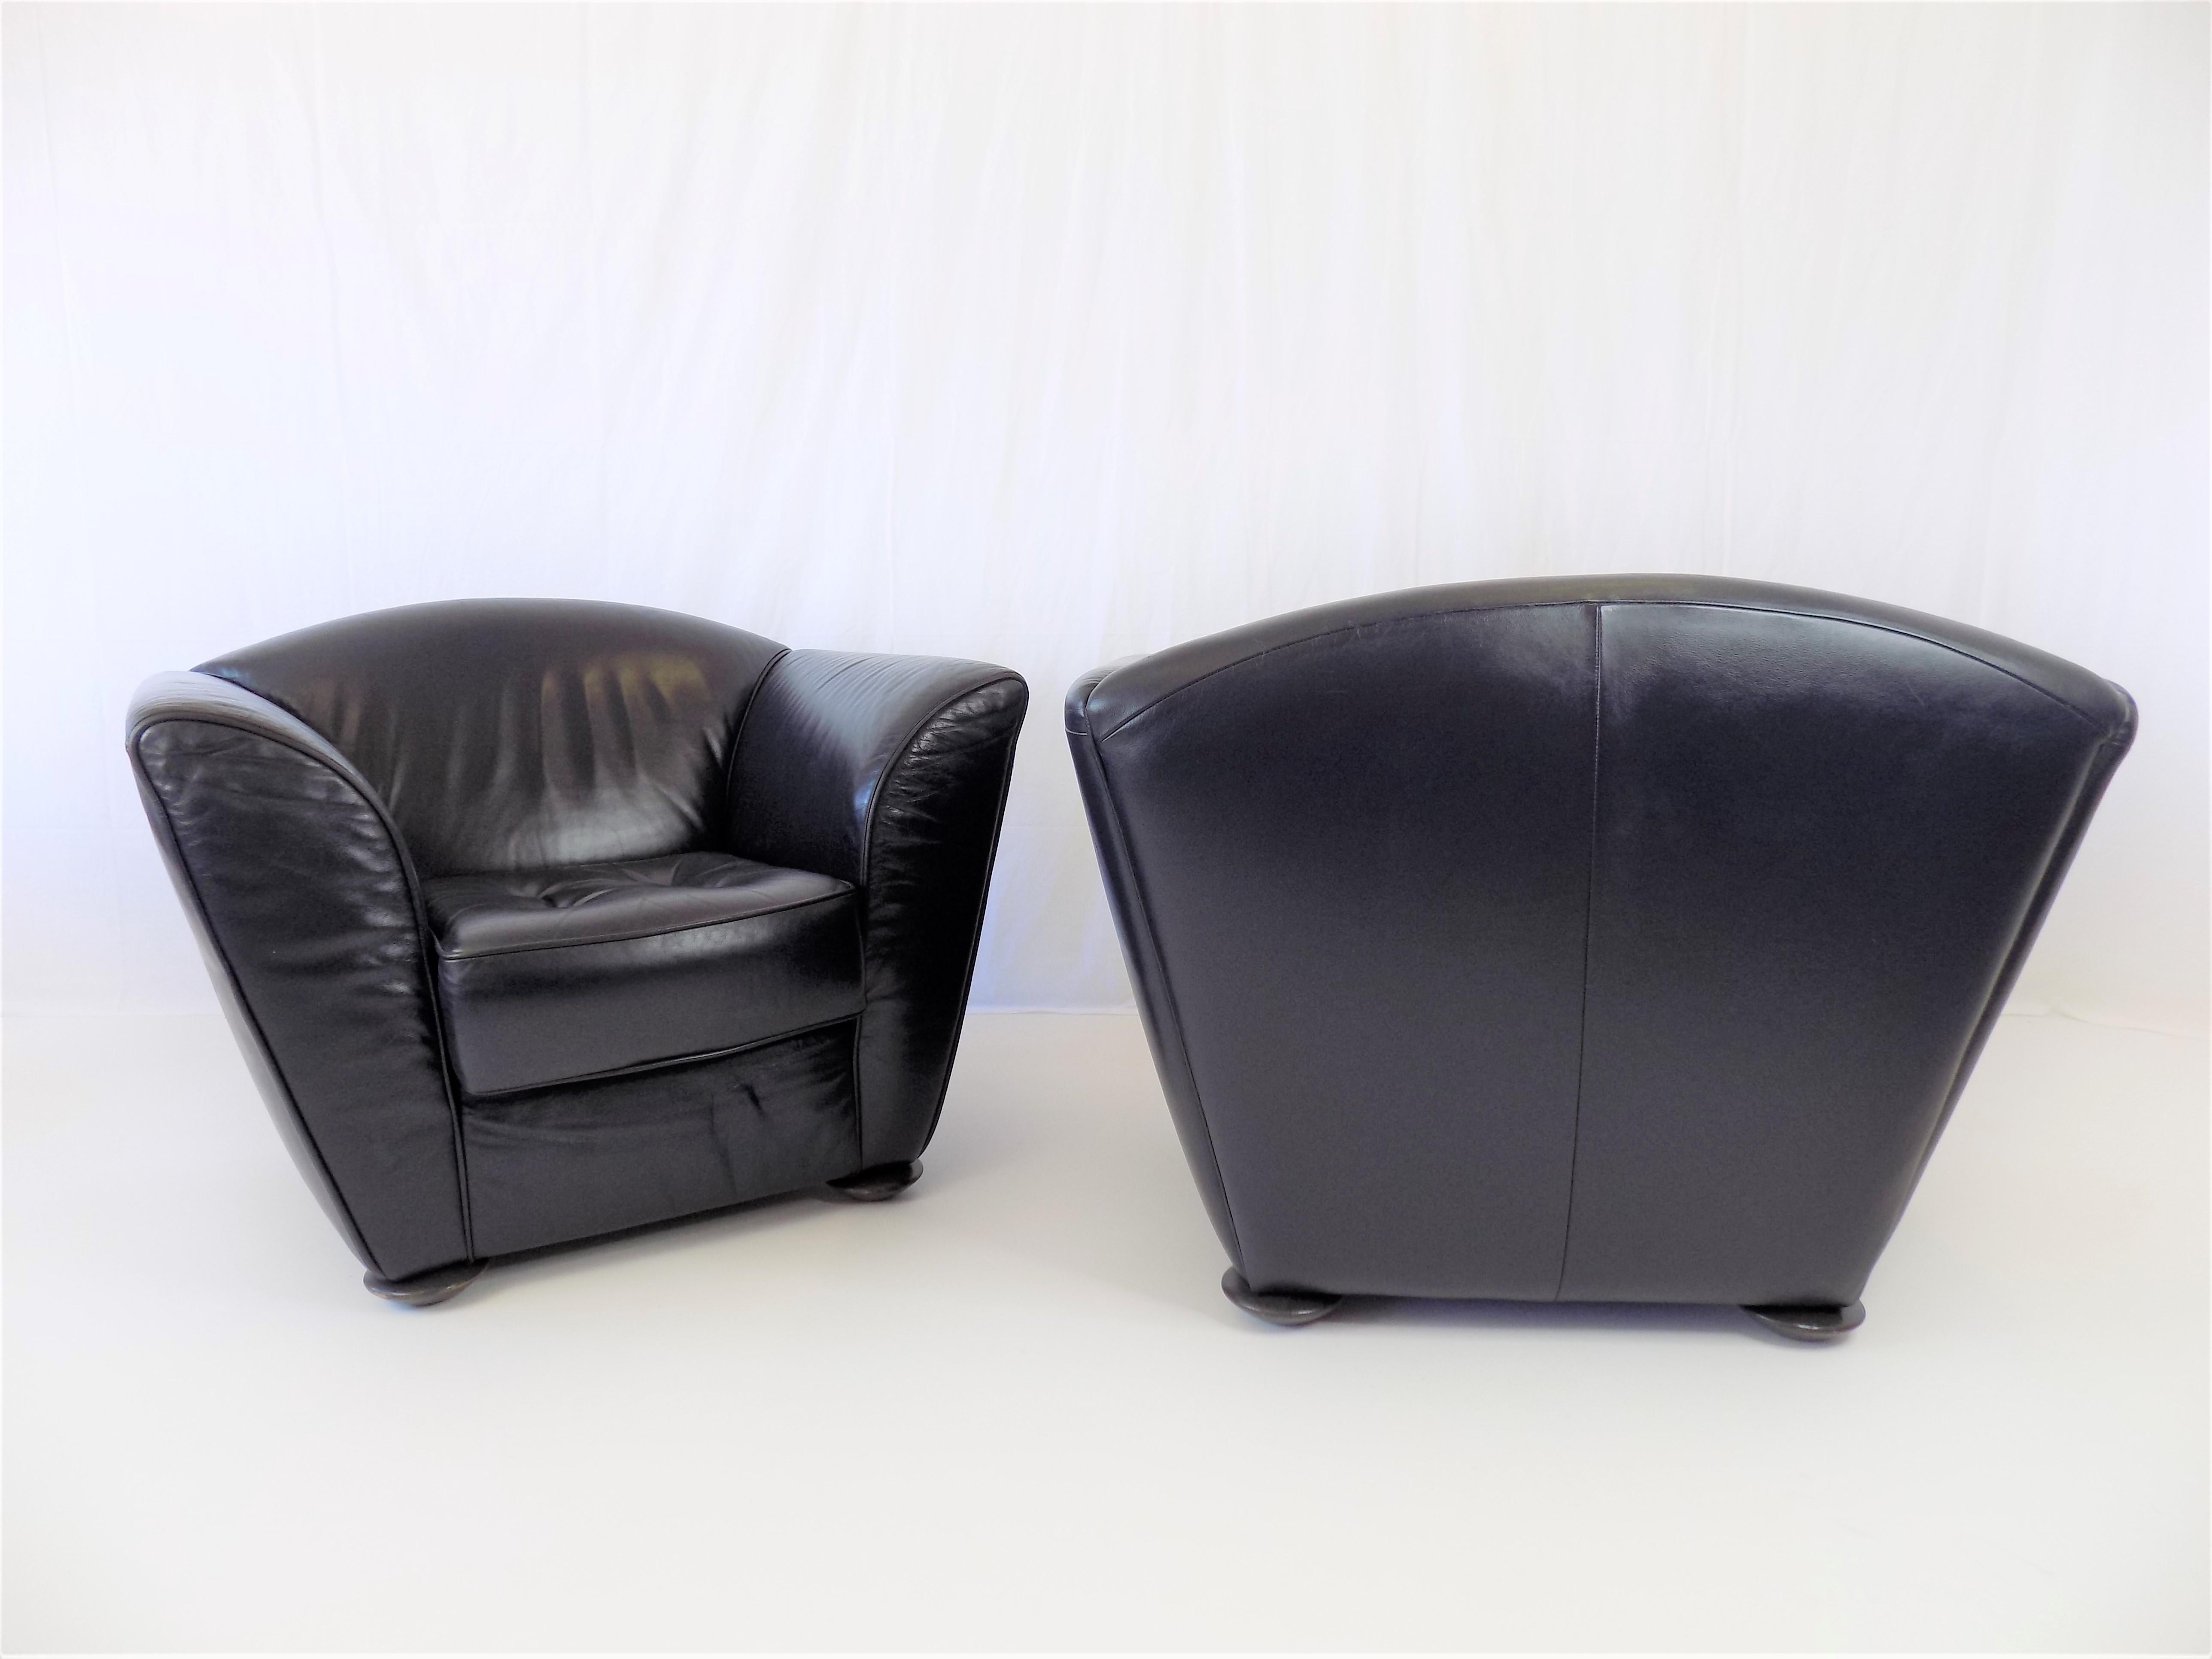 Post-Modern Cor Zelda Set of 2 Leather Armchairs By Peter Maly, Germany, 1980 For Sale